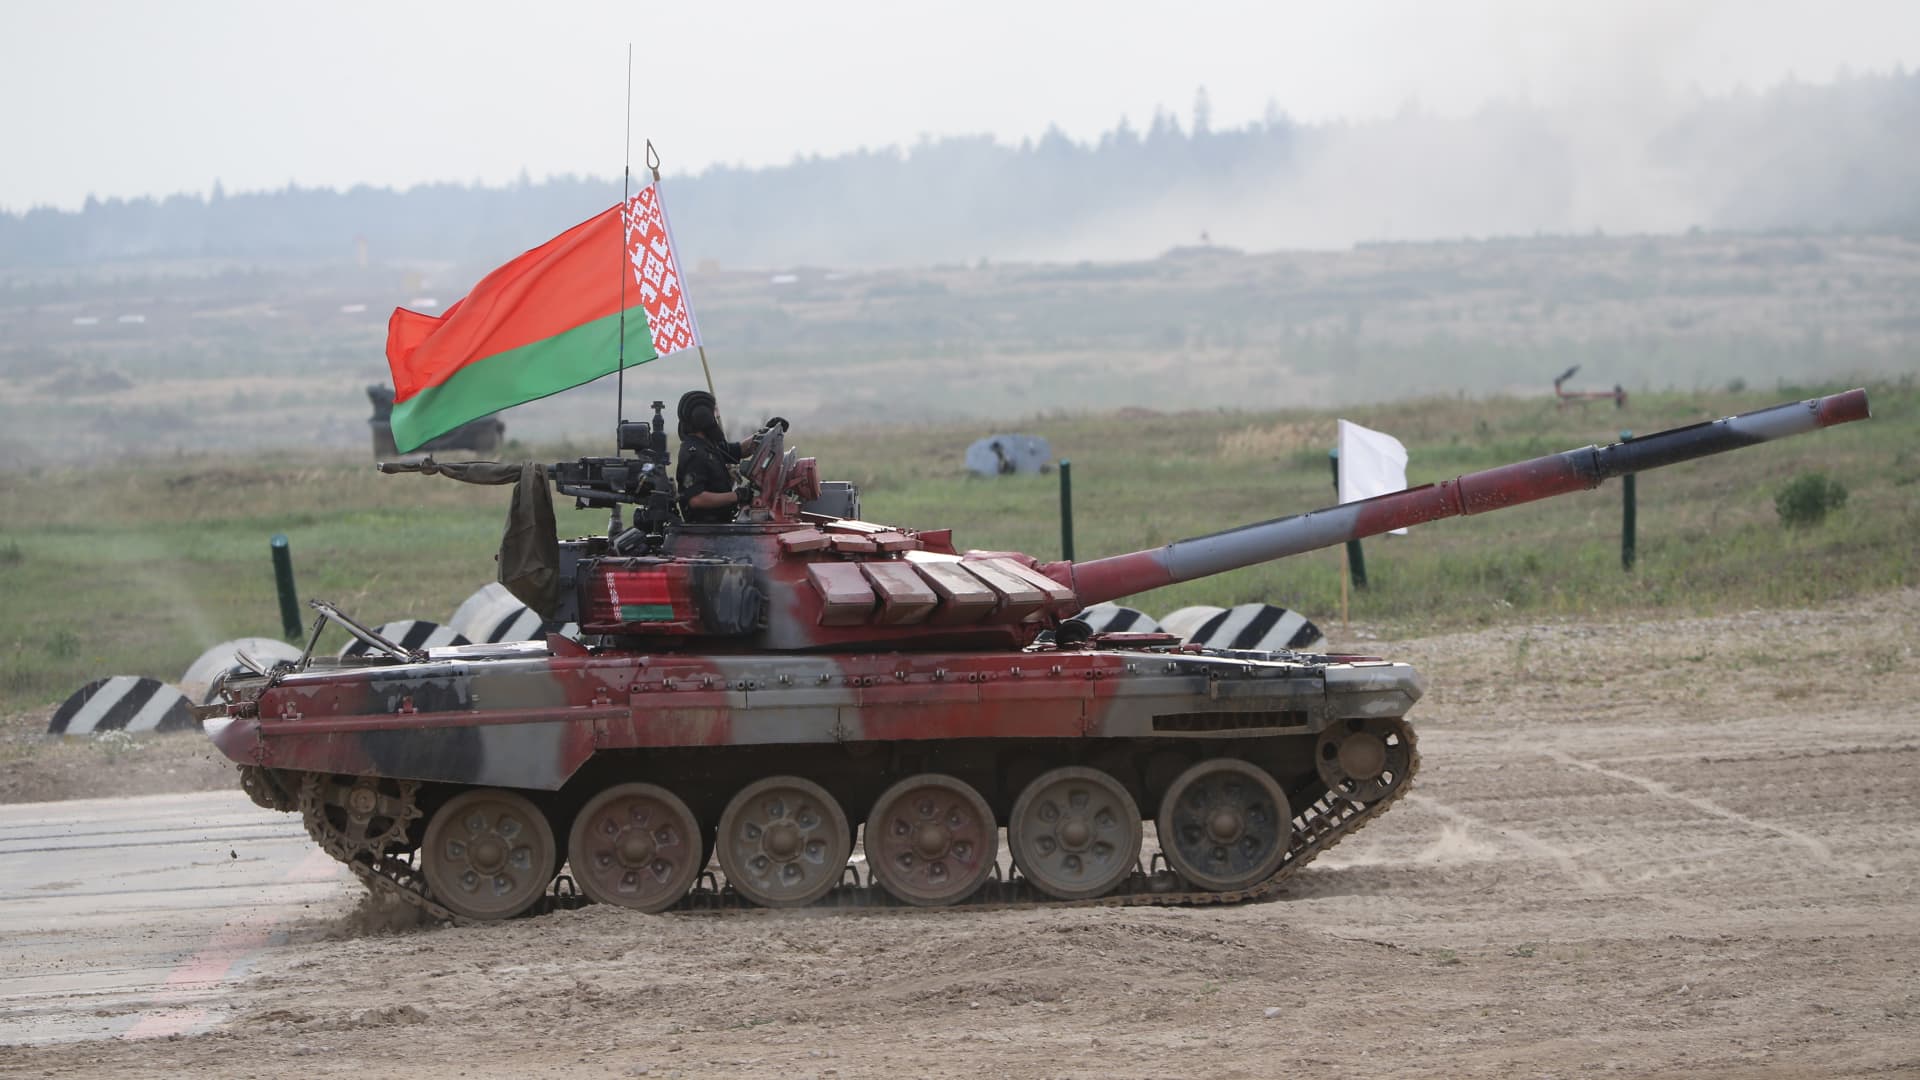 Team of Belarus on a T-72 B3 battle tank with Belarussian flag at a military polygon, on August 27, 2022, in Alabino, outside of Moscow, Russia.